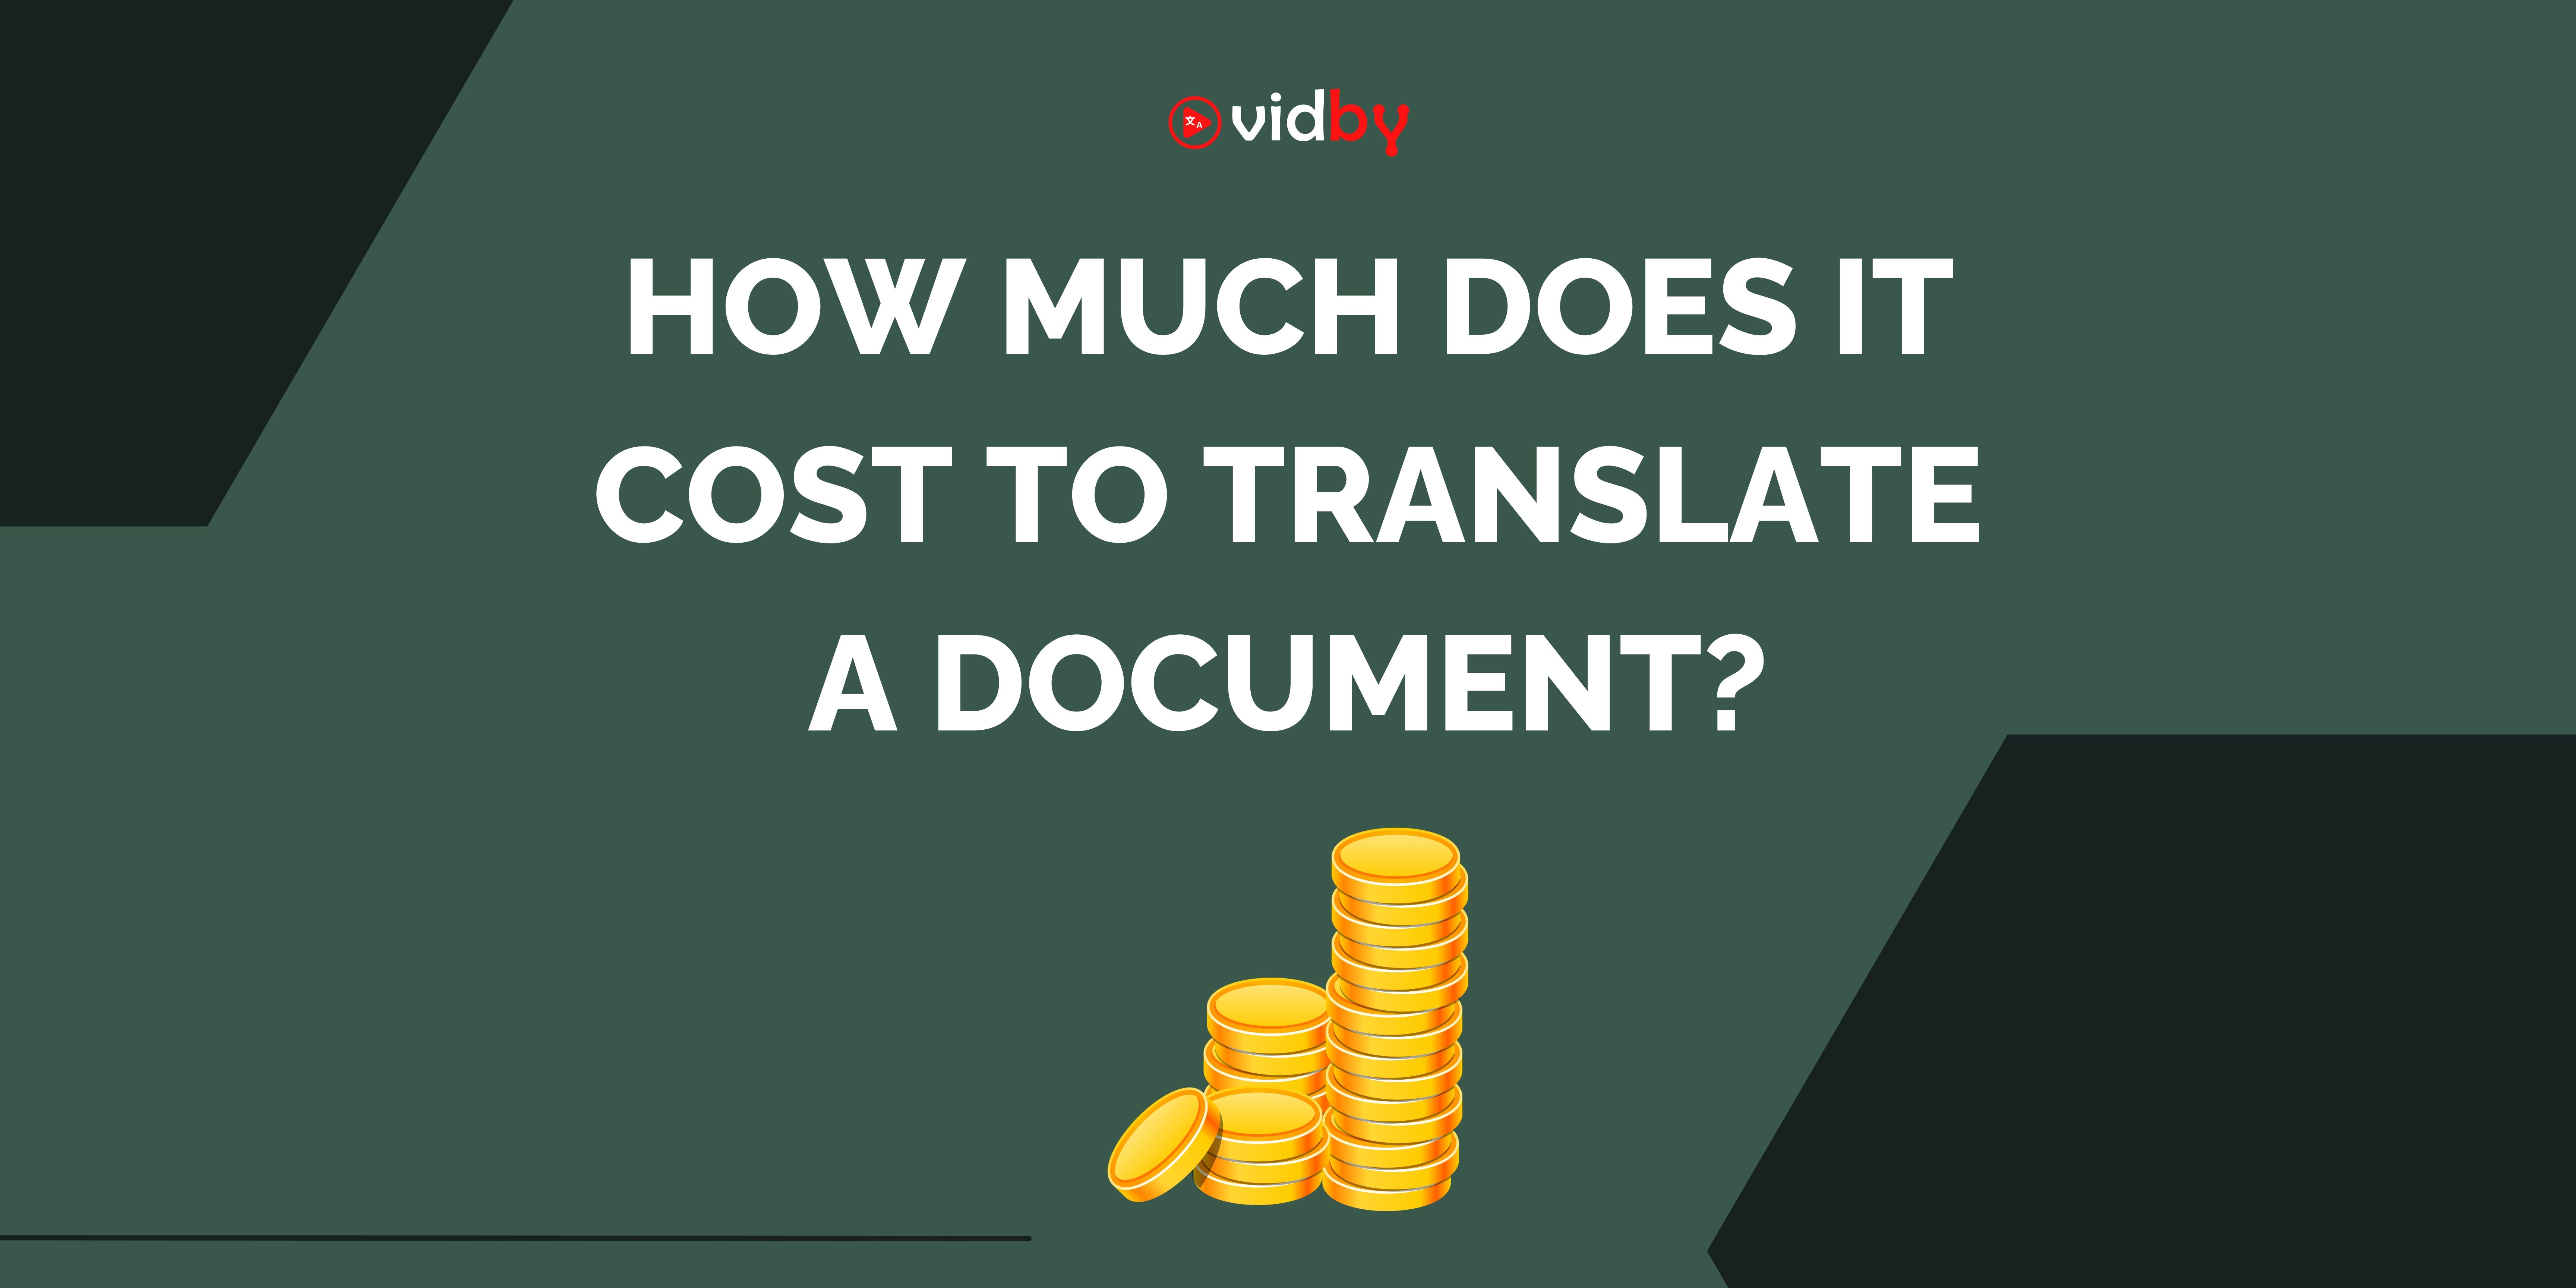 How Much Does It Cost to Translate a Document